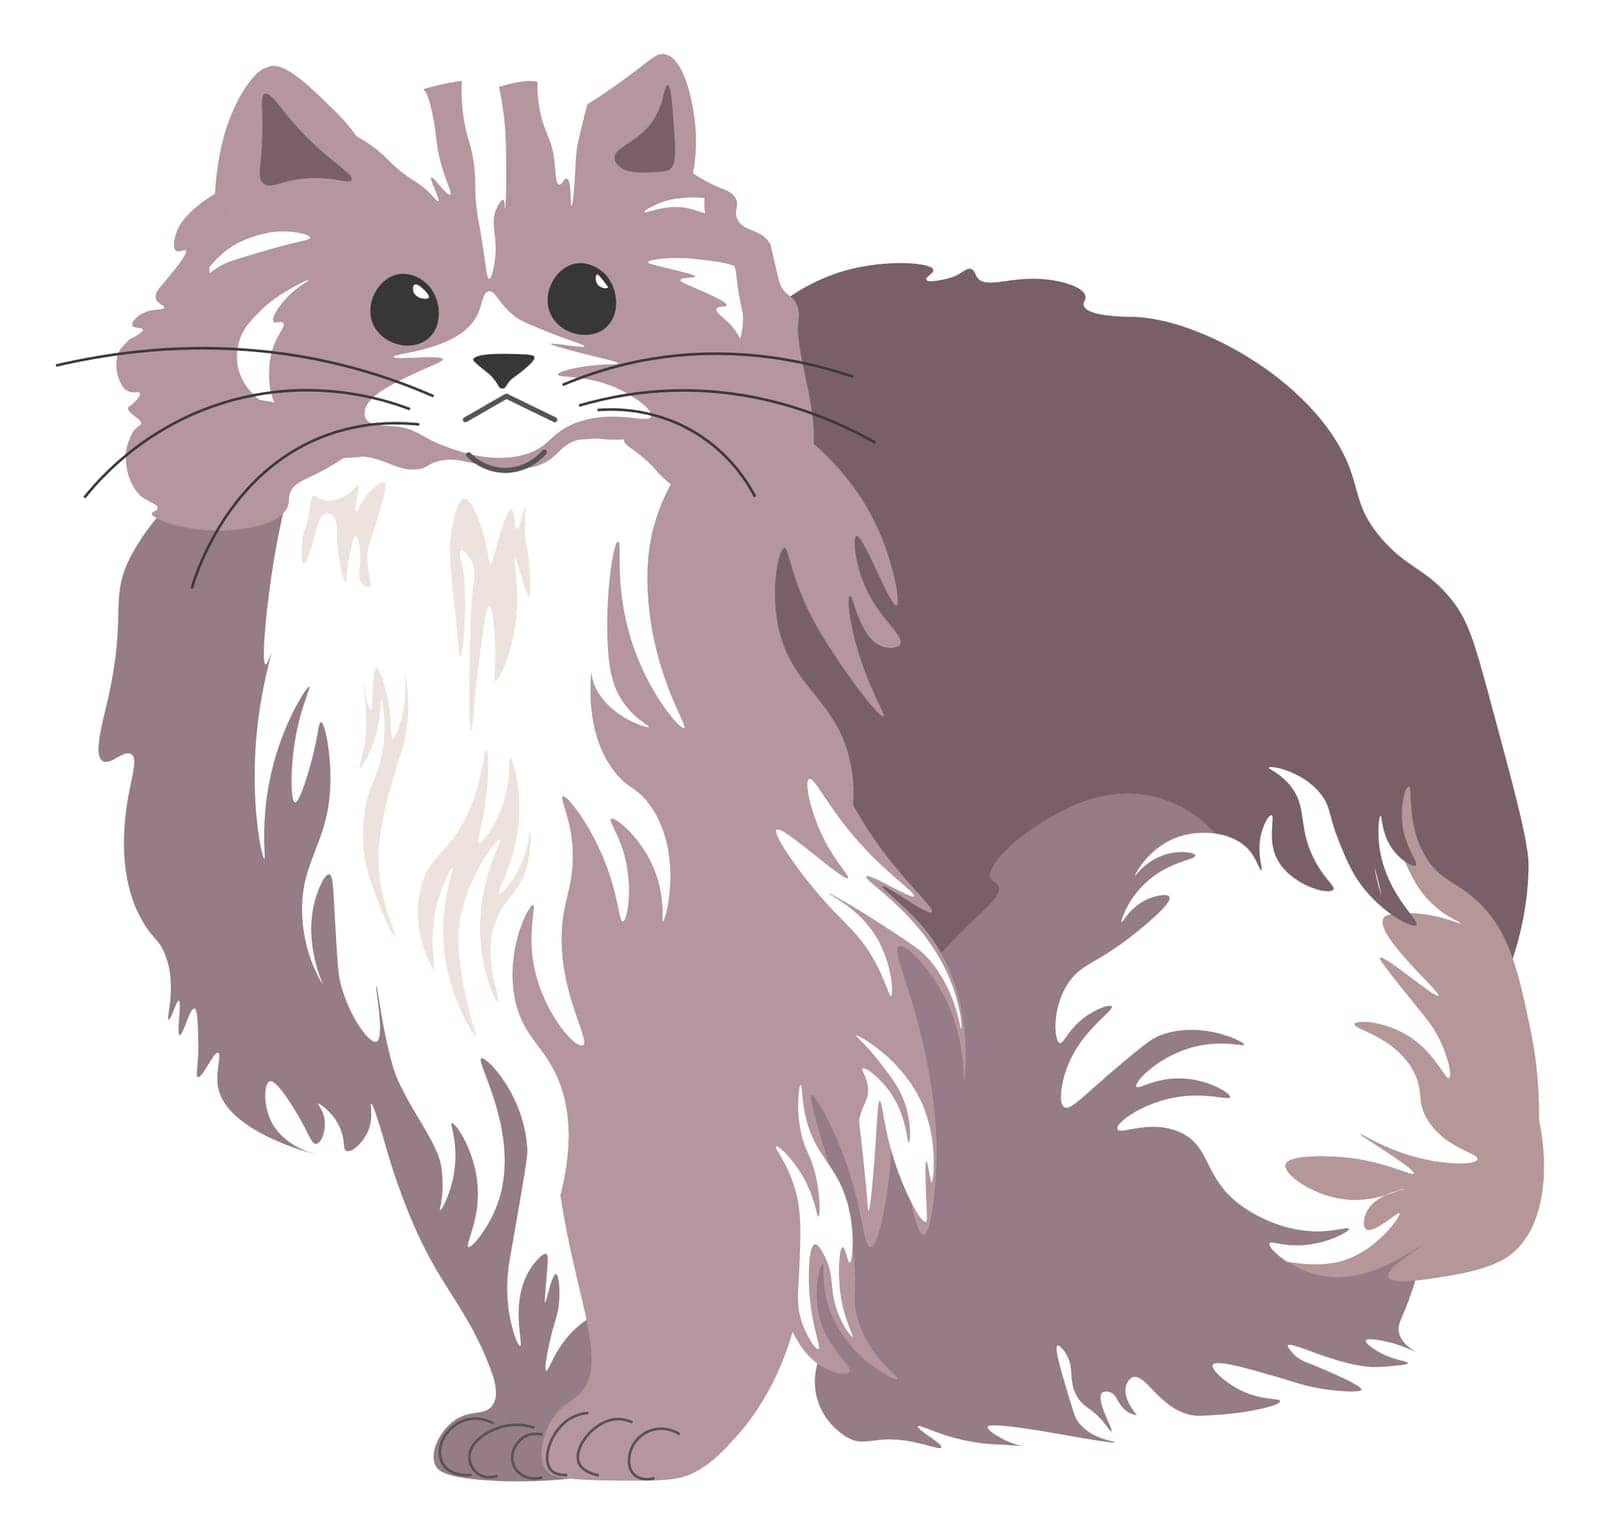 Furry cat, kitty with whiskers, feline animal by Sonulkaster